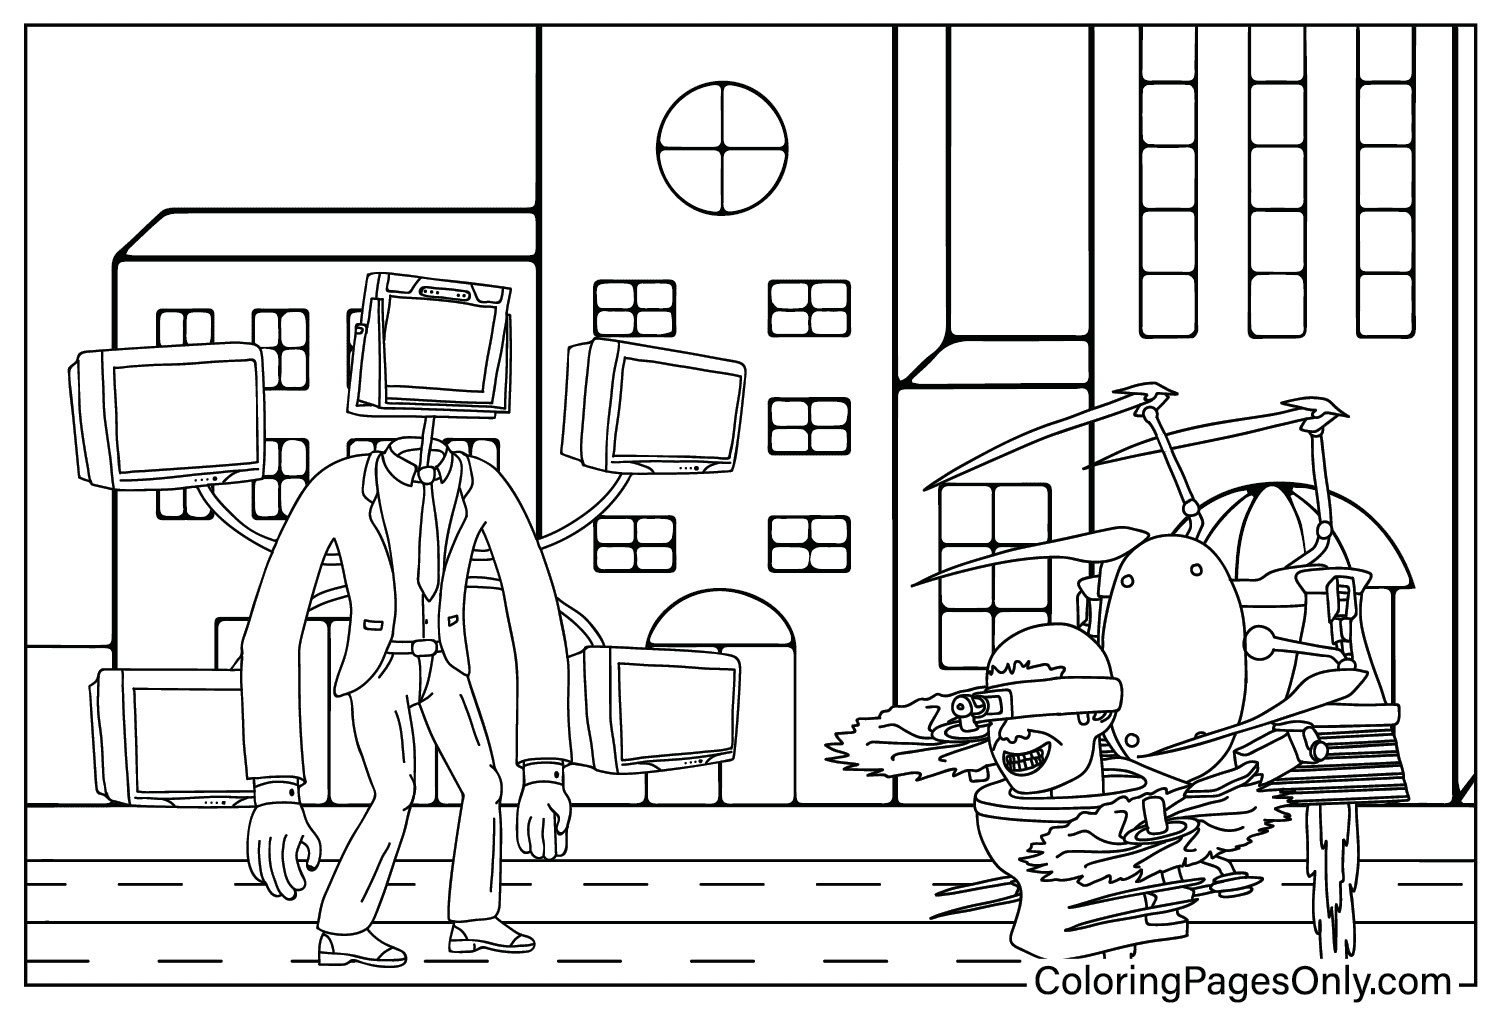 Dual Buzzsaw Mutant And Titan TV Man Coloring Page from Dual Buzzsaw Mutant